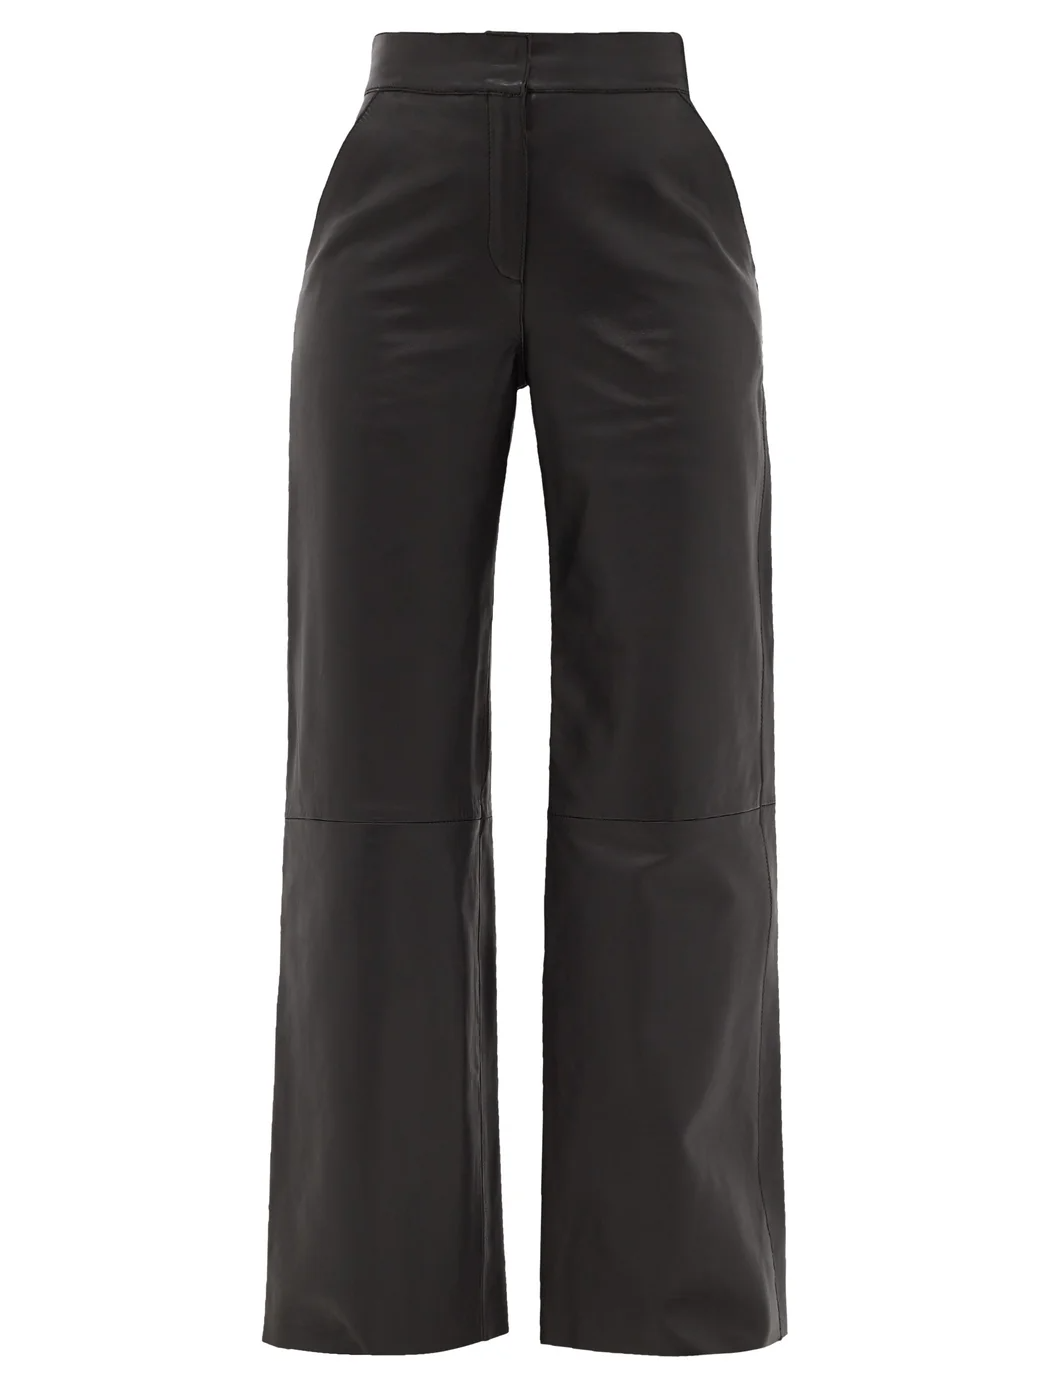 Stand Studio + Megan Leather High-Rise Trousers